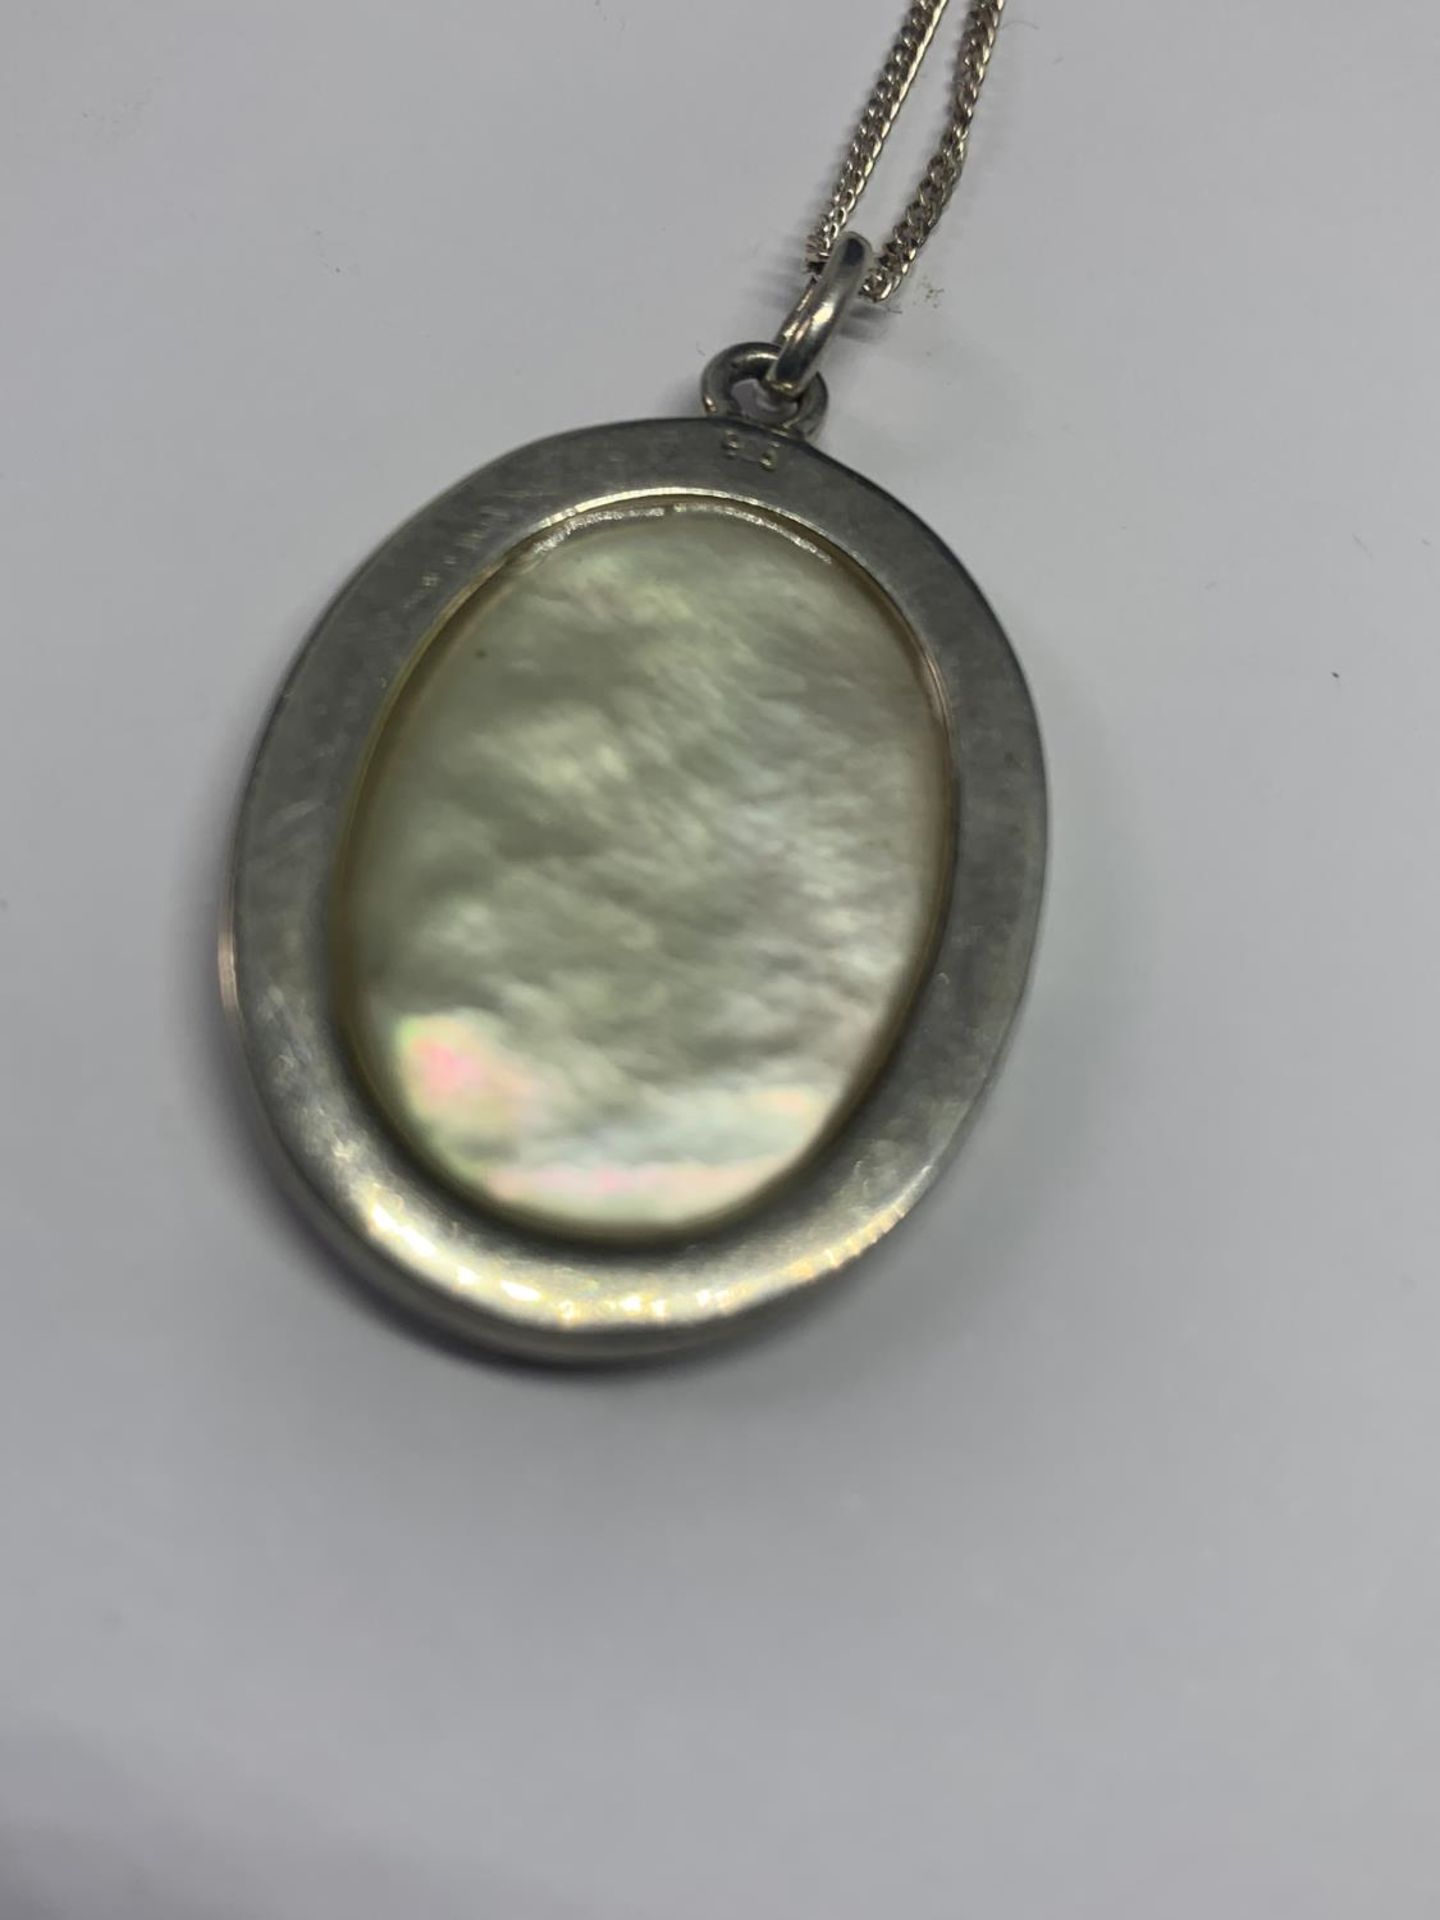 TWO SILVER NECKLACES WITH PENDANTS - Image 5 of 10